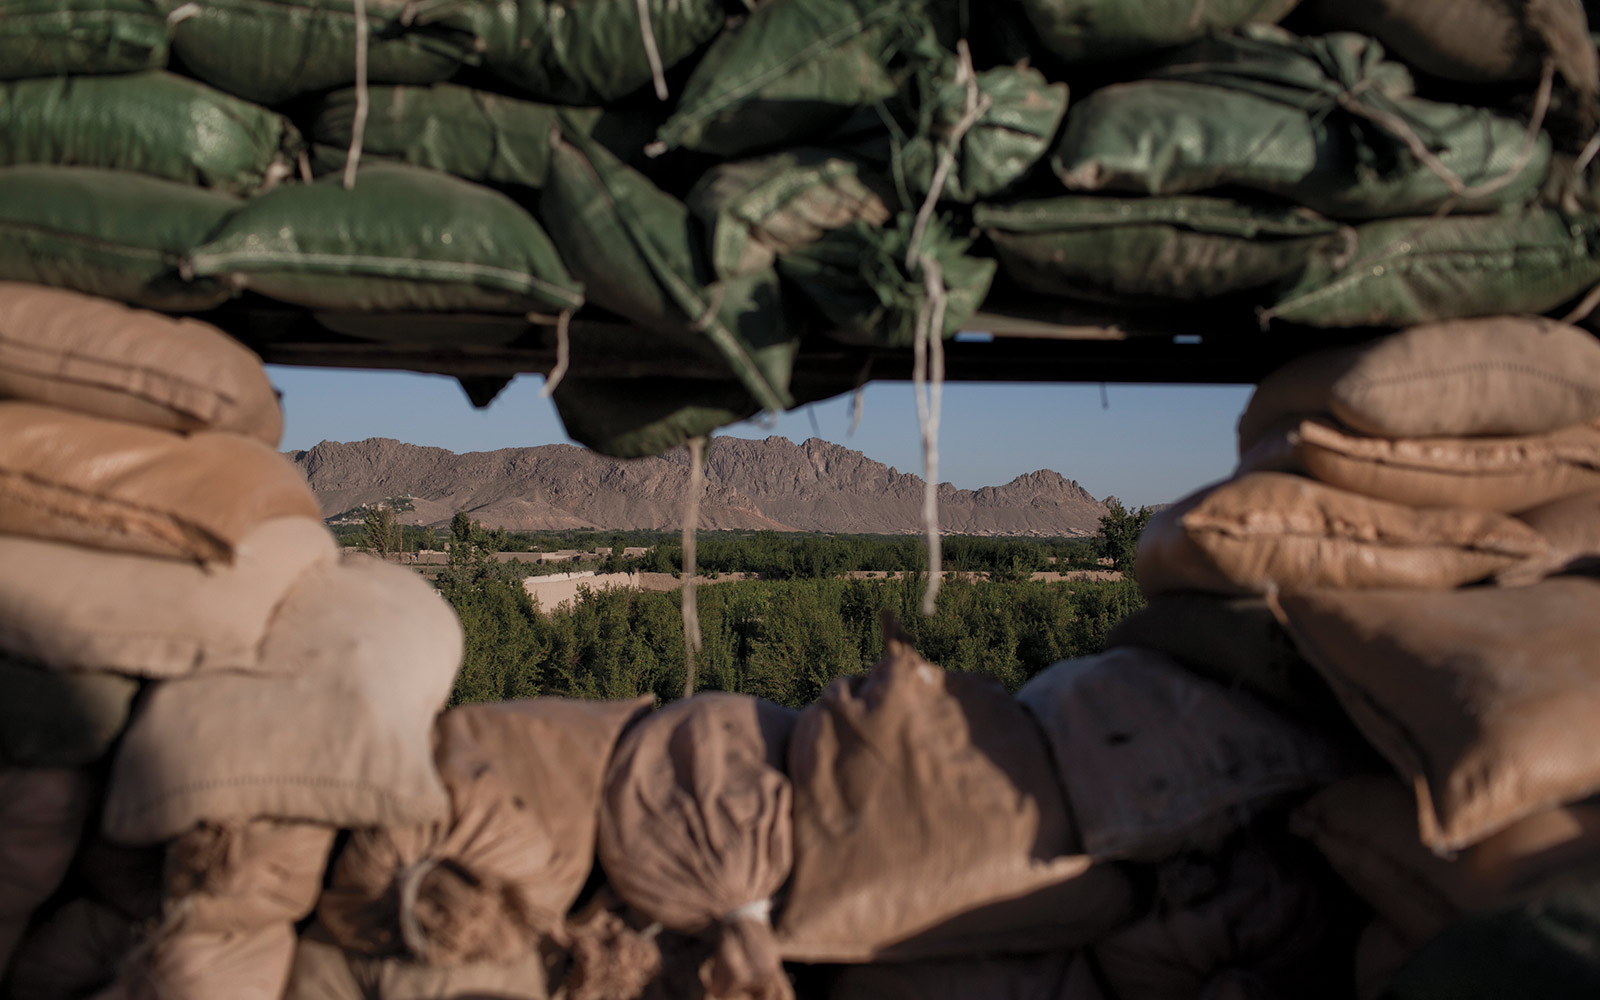 A view from behind a gun emplacement in the Arghandab River Valley in Kandahar. The embankment sits on top of a schoolhouse that had been torched by the Taliban.